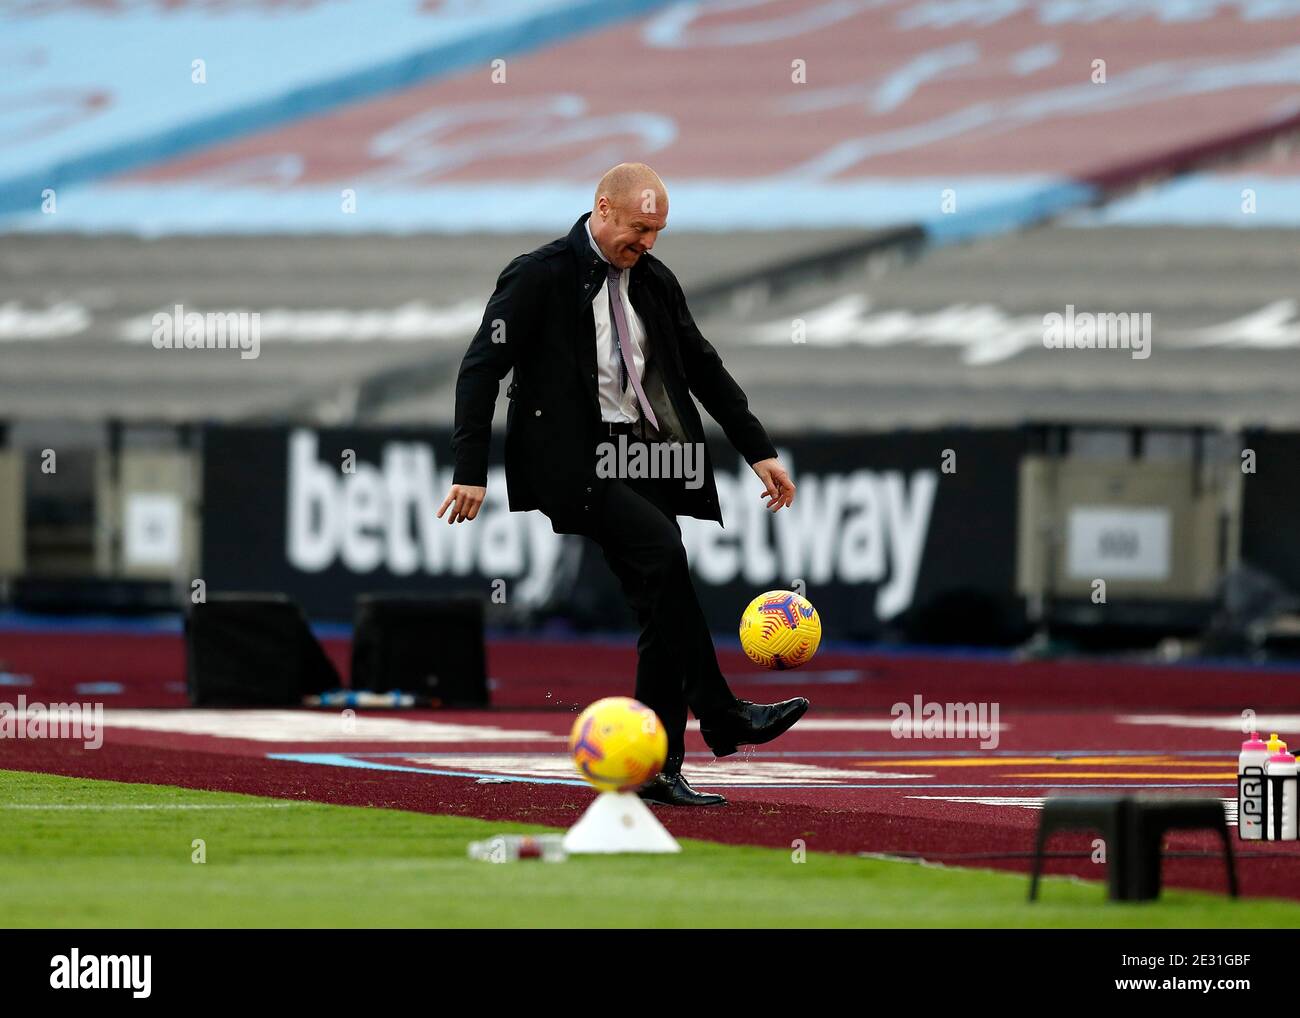 London Stadium, London, UK. 16th Jan, 2021. English Premier League Football, West Ham United versus Burnley; Burnley Manager Sean Dyche doing keepie uppies with the match ball from the touchline during the 1st half Credit: Action Plus Sports/Alamy Live News Stock Photo